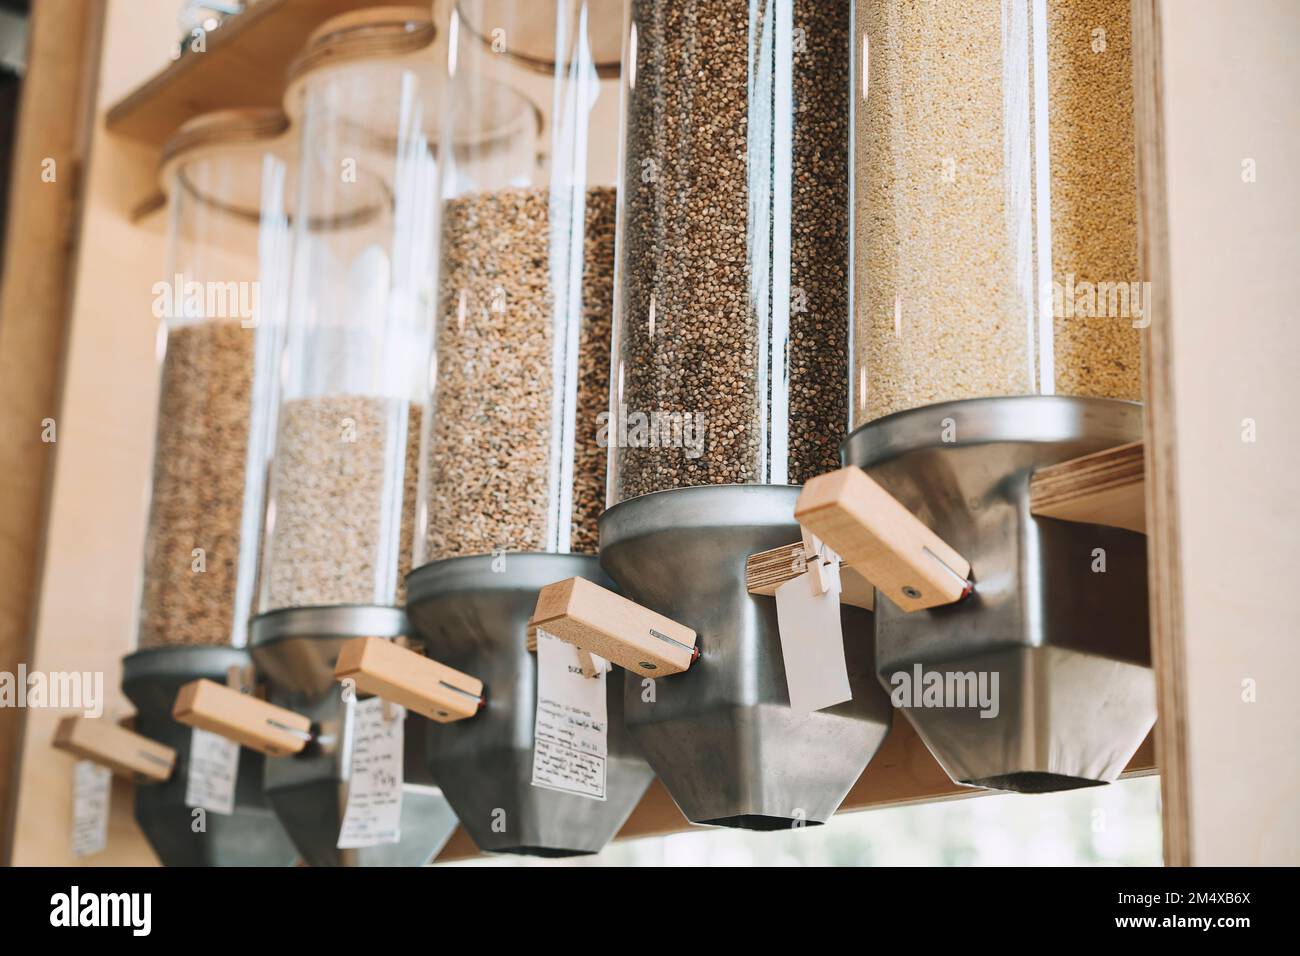 Food dispensers with lentils in store Stock Photo